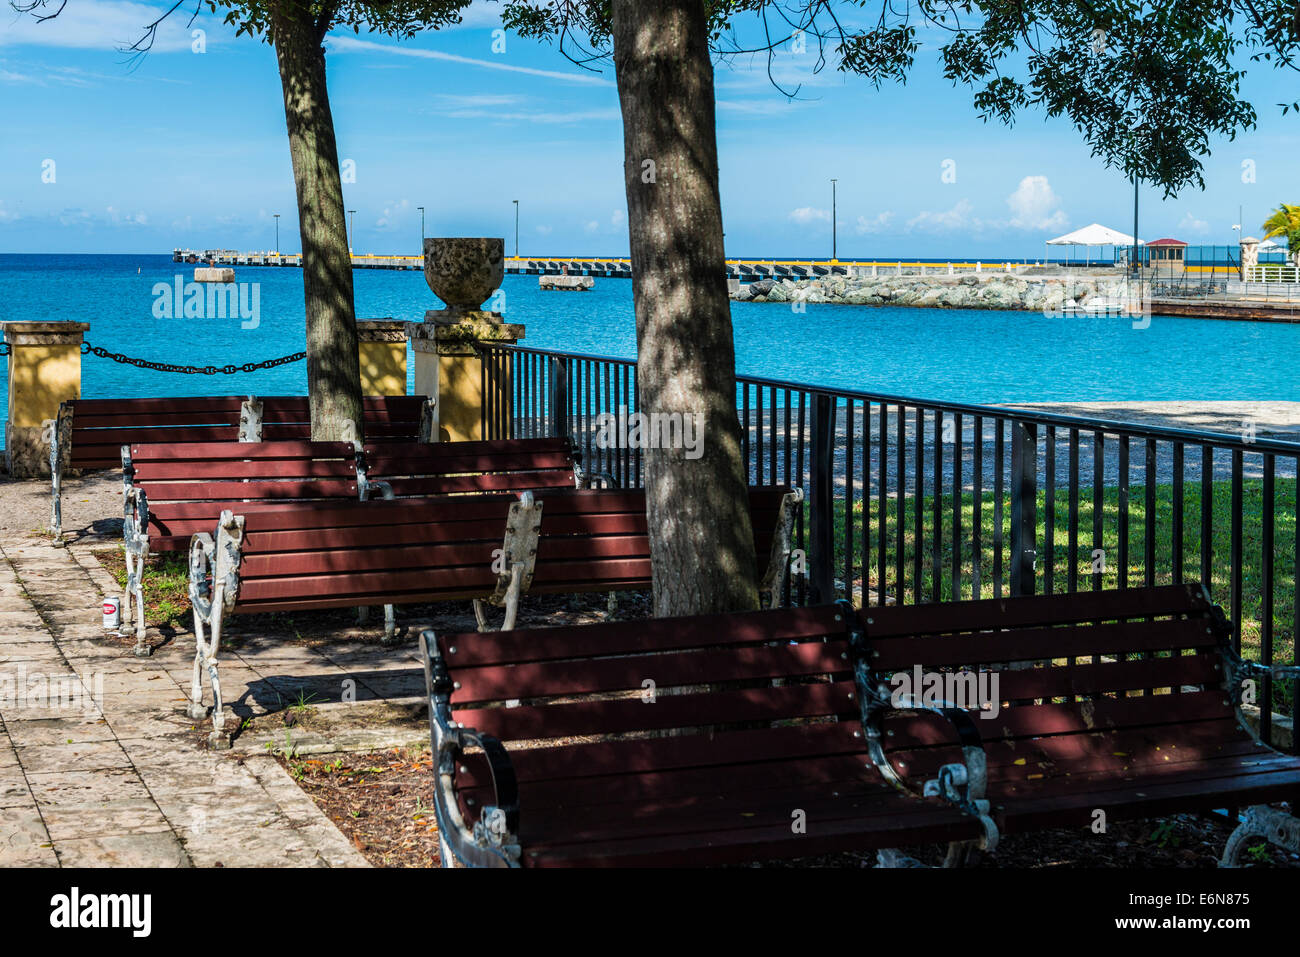 A waterfront seating area near the Frederiksted pier, a port for cruise ships in Frederiksted, St. Croix, U. S. Virgin Islands. Stock Photo